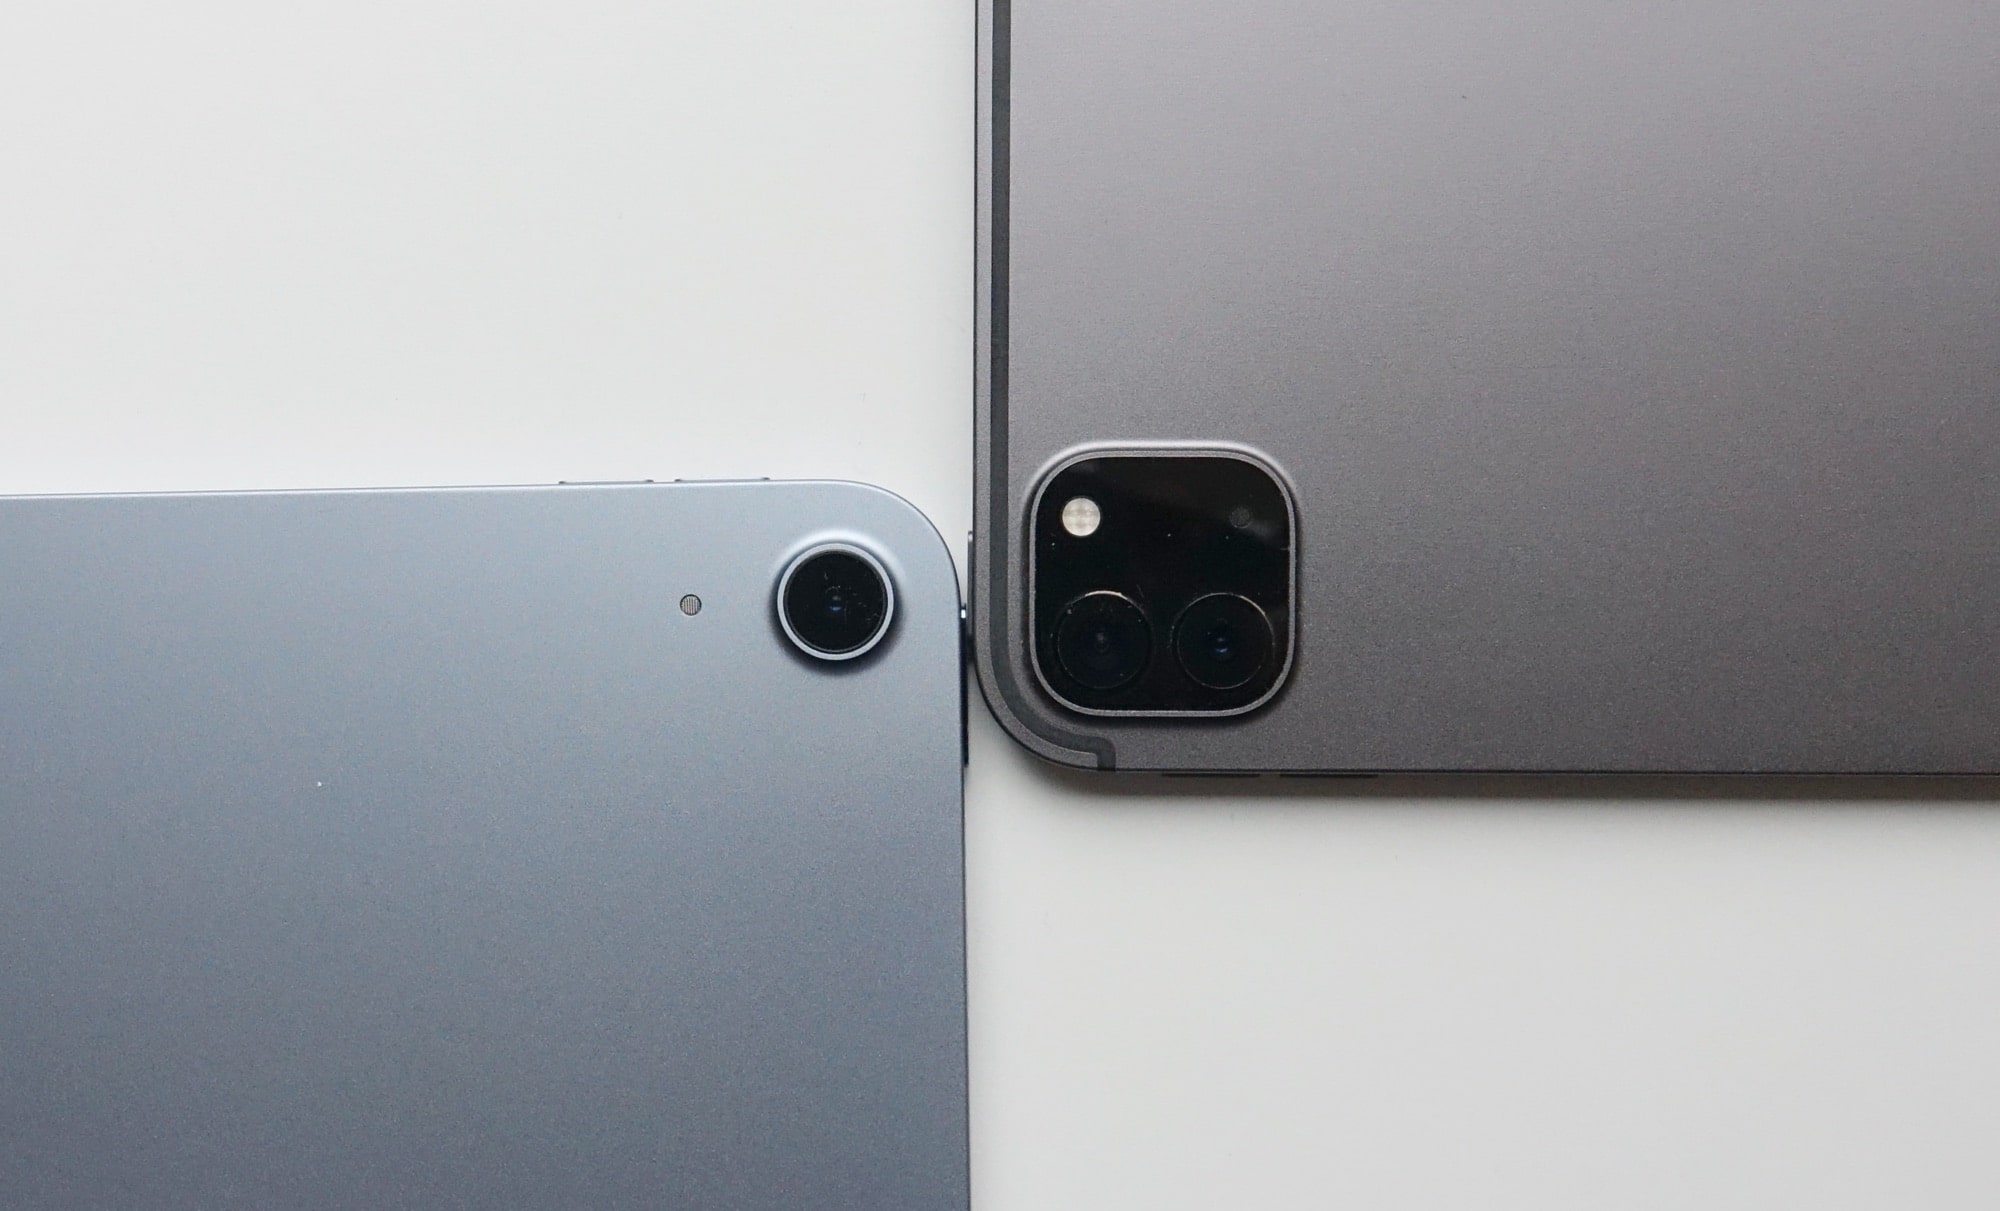 Camera differences in the iPad Air (left) and iPad Pro (right)